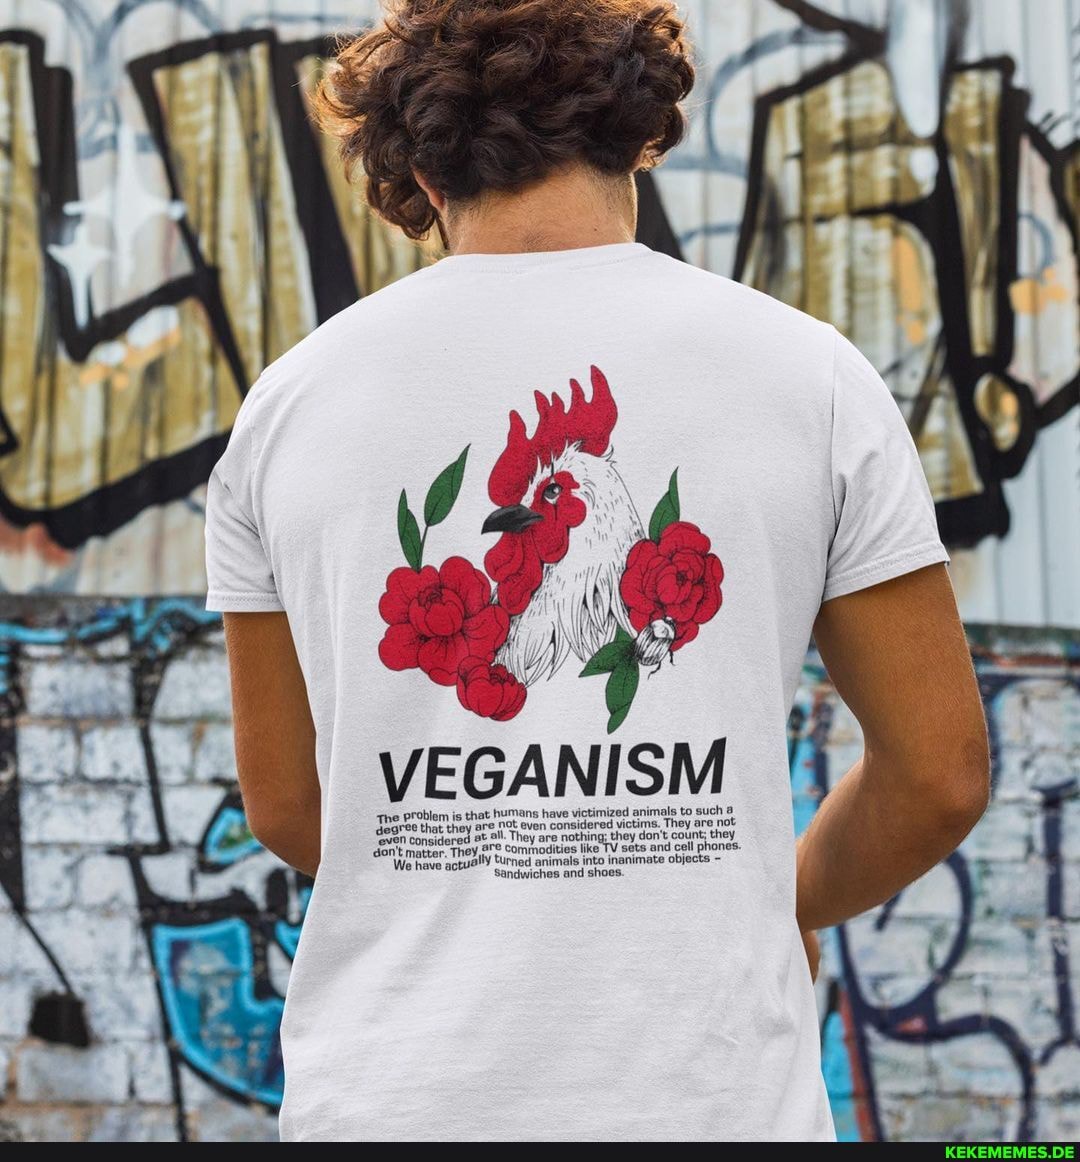 VEGANISM 'The problem js that humans have victimized animals to such degree that